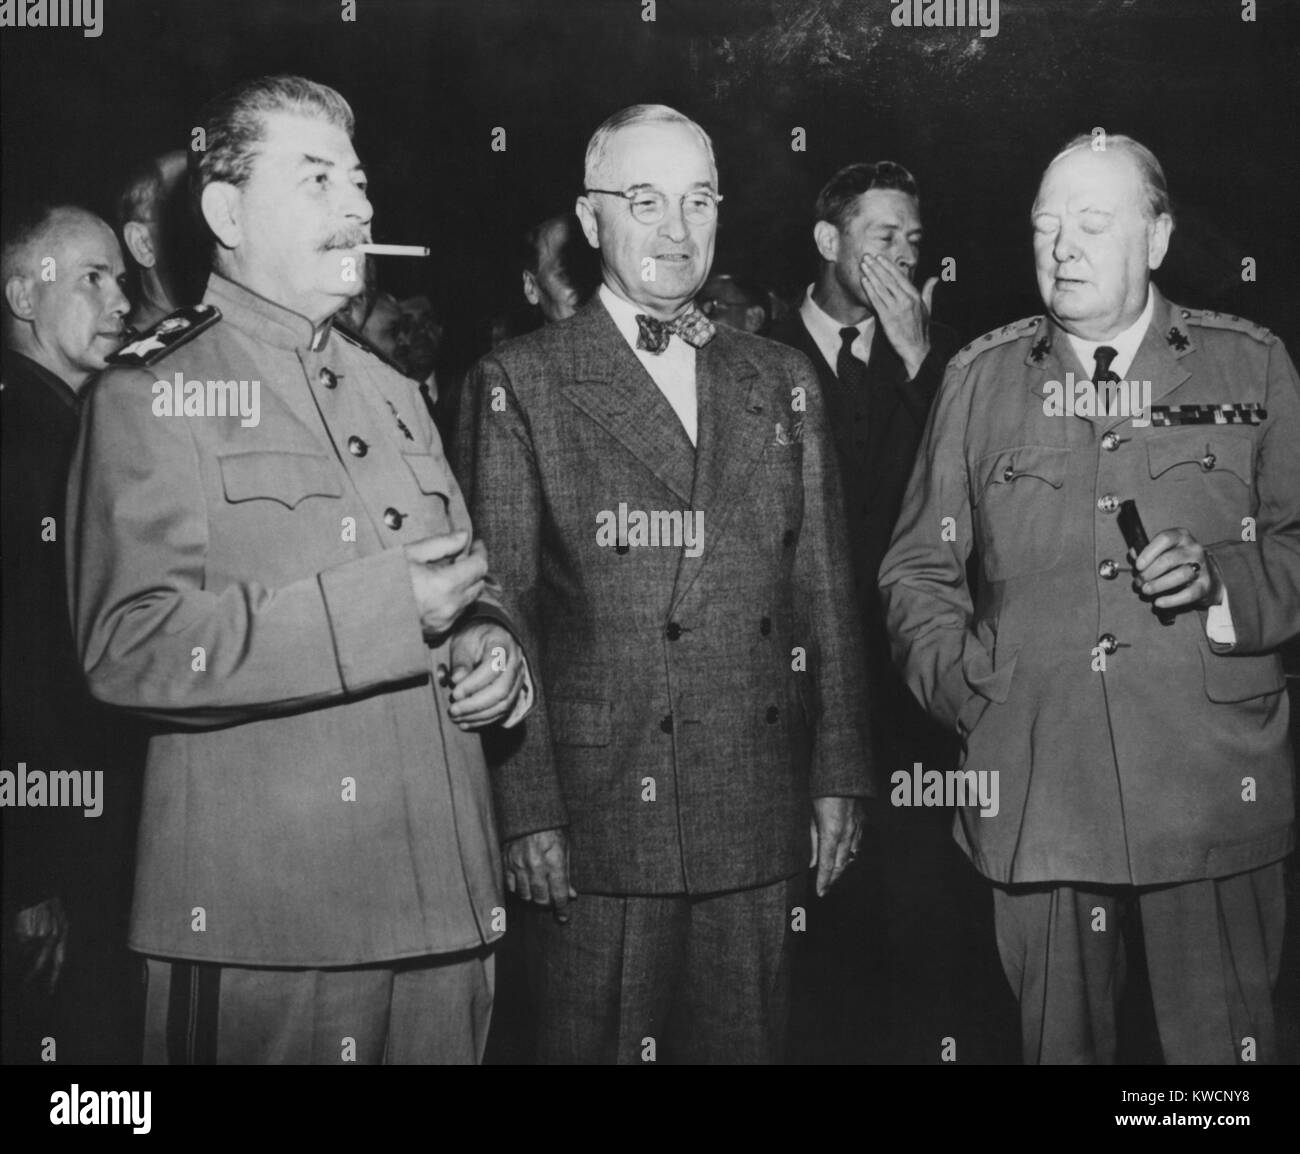 The 'Big Three' leaders of the Allies fighting against the Axis nations of World War 2. L-R: Joseph Stalin, Harry Truman, and Winston Churchill. July 18, 1945. - (BSLOC 2014 15 24) Stock Photo